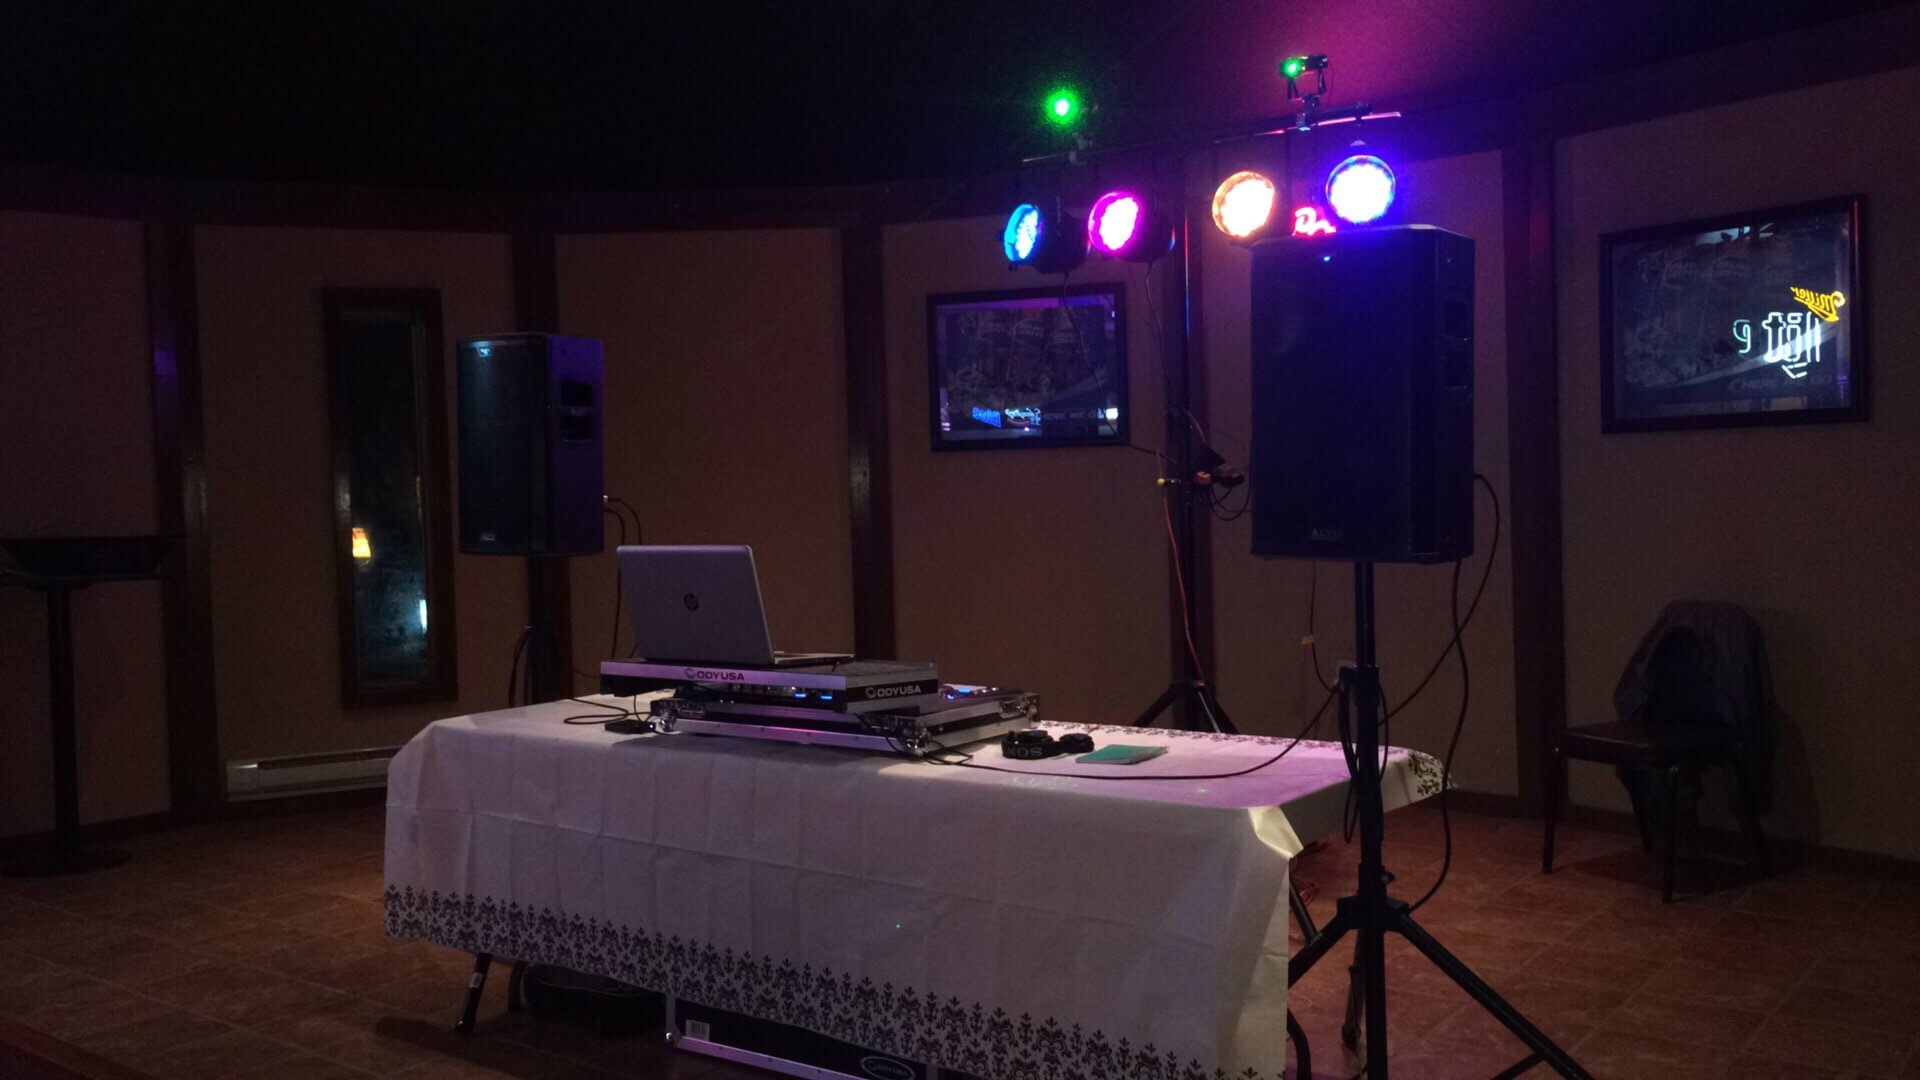 Static image of dj setup with lights and speakers